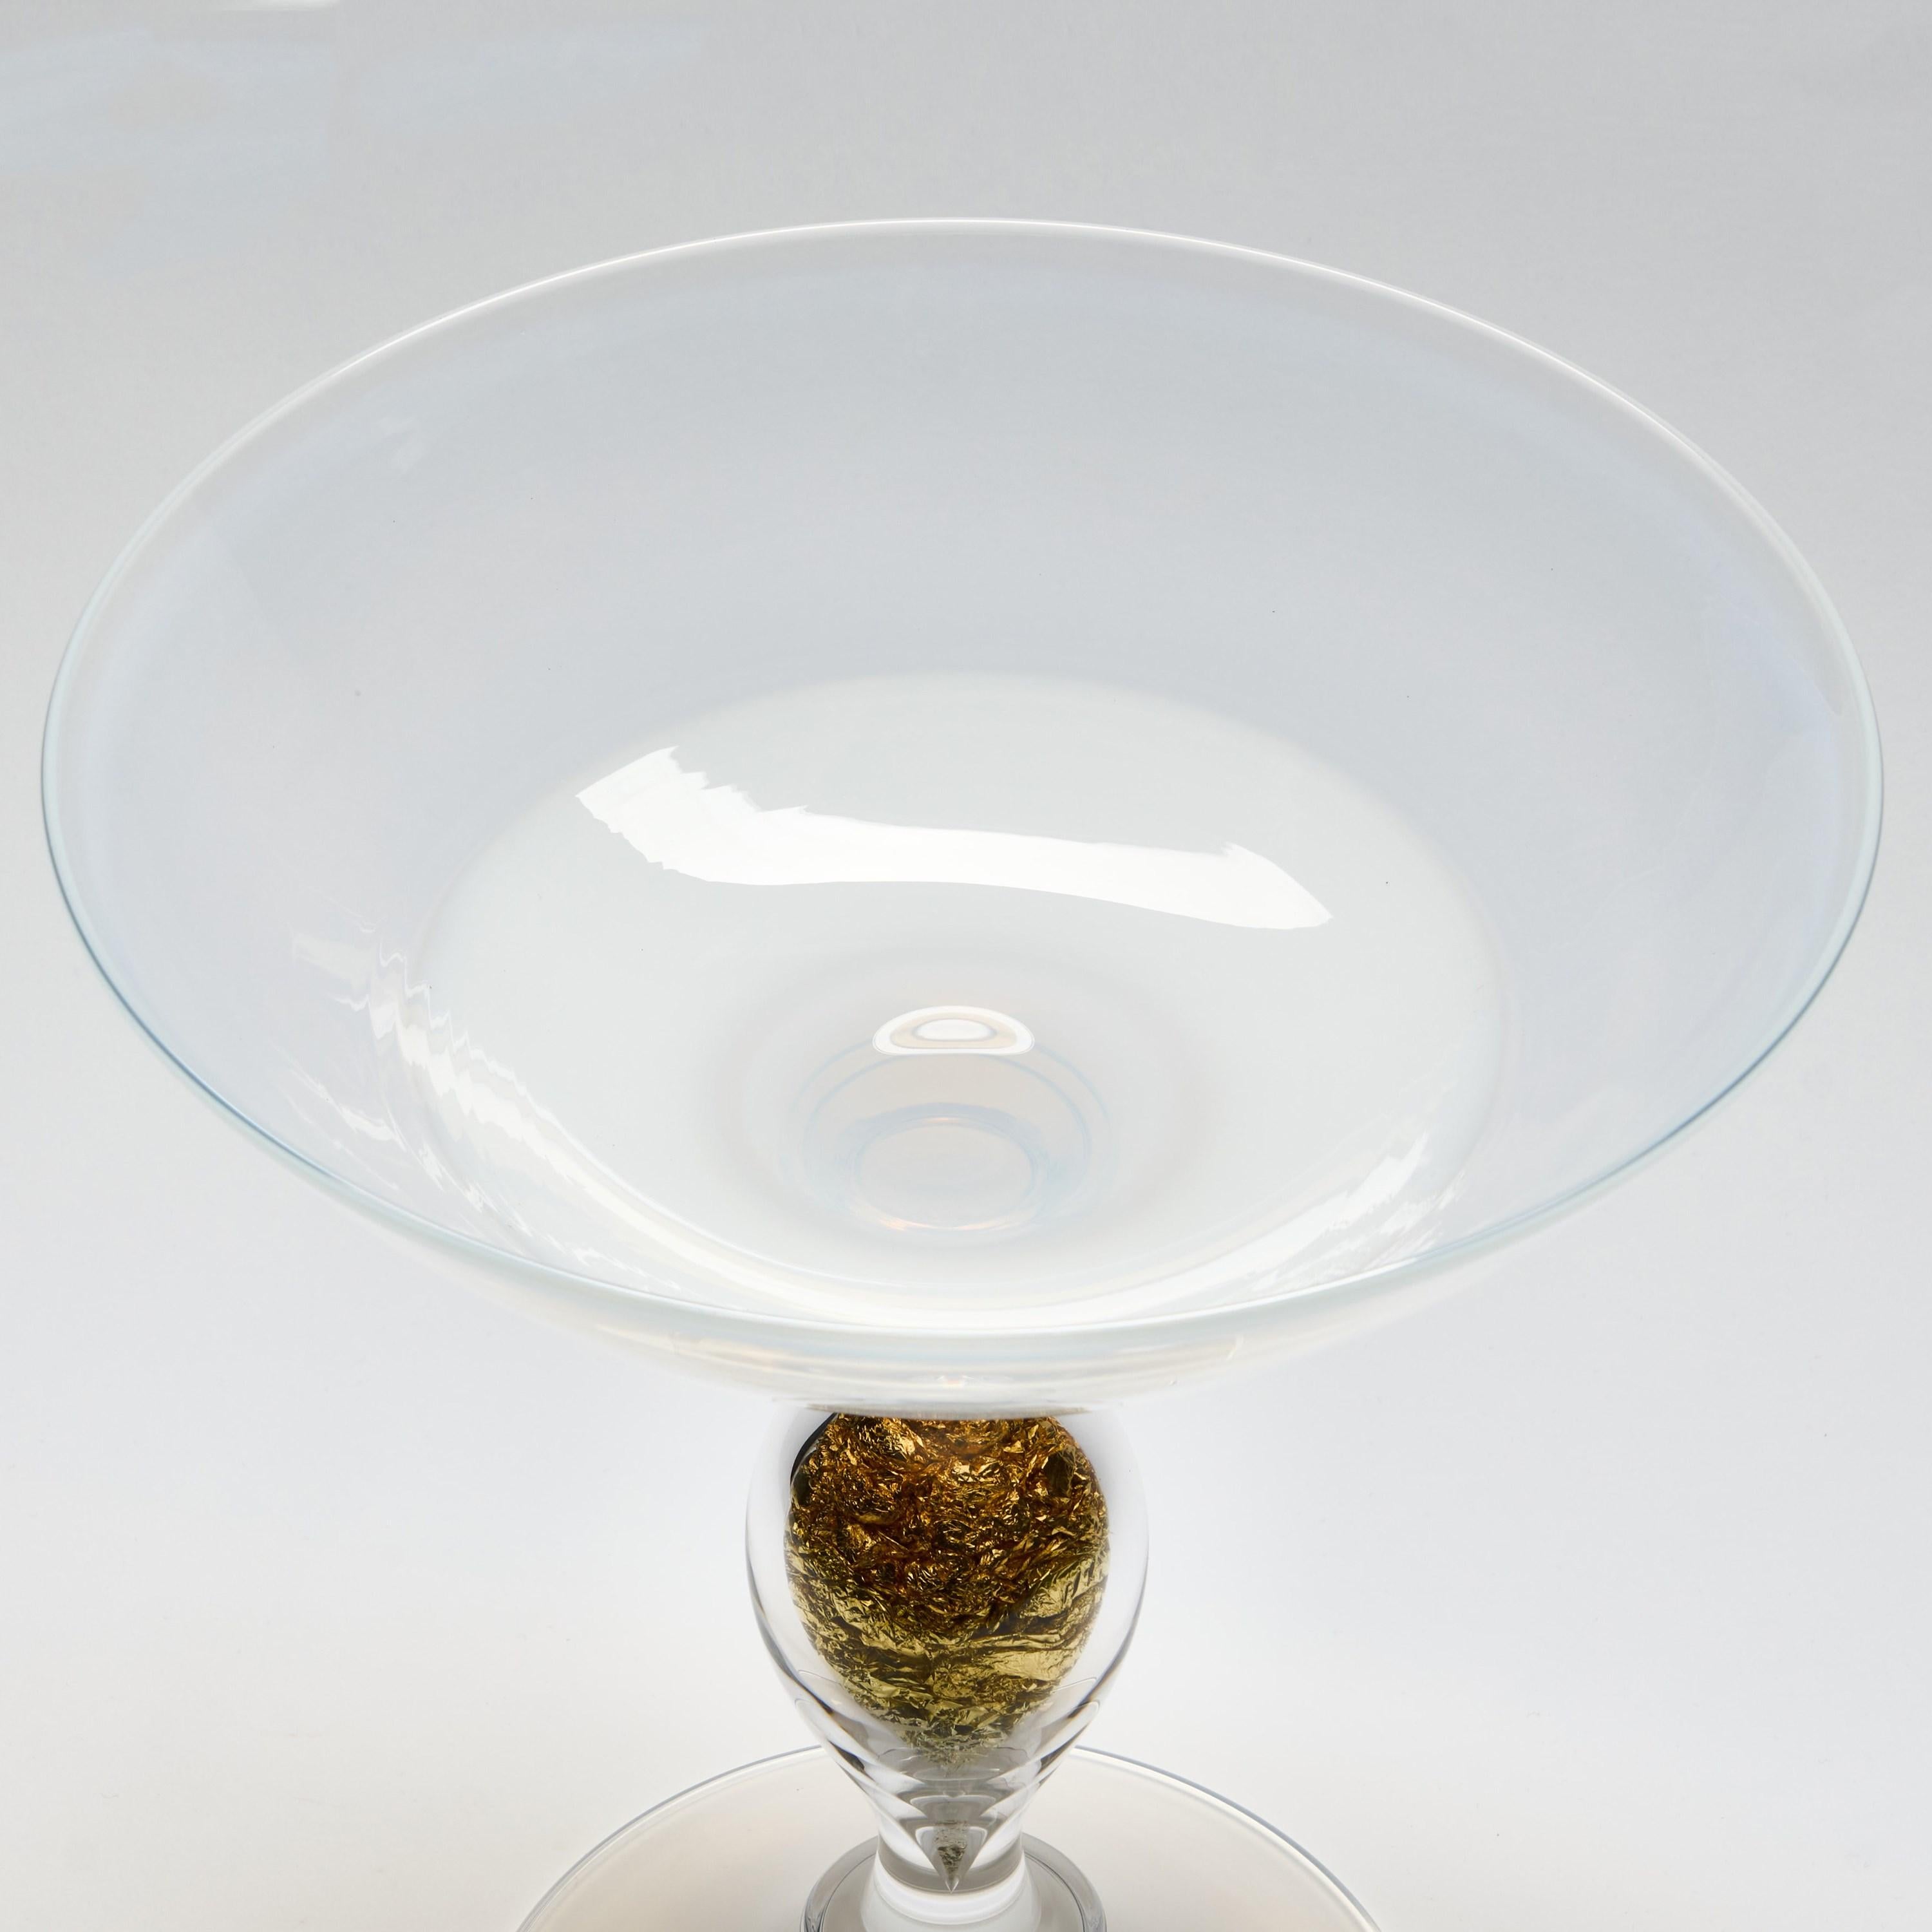 Gambo d’Oro, a milky white glass & gold leaf centrepiece by Anthony Scala In New Condition For Sale In London, GB